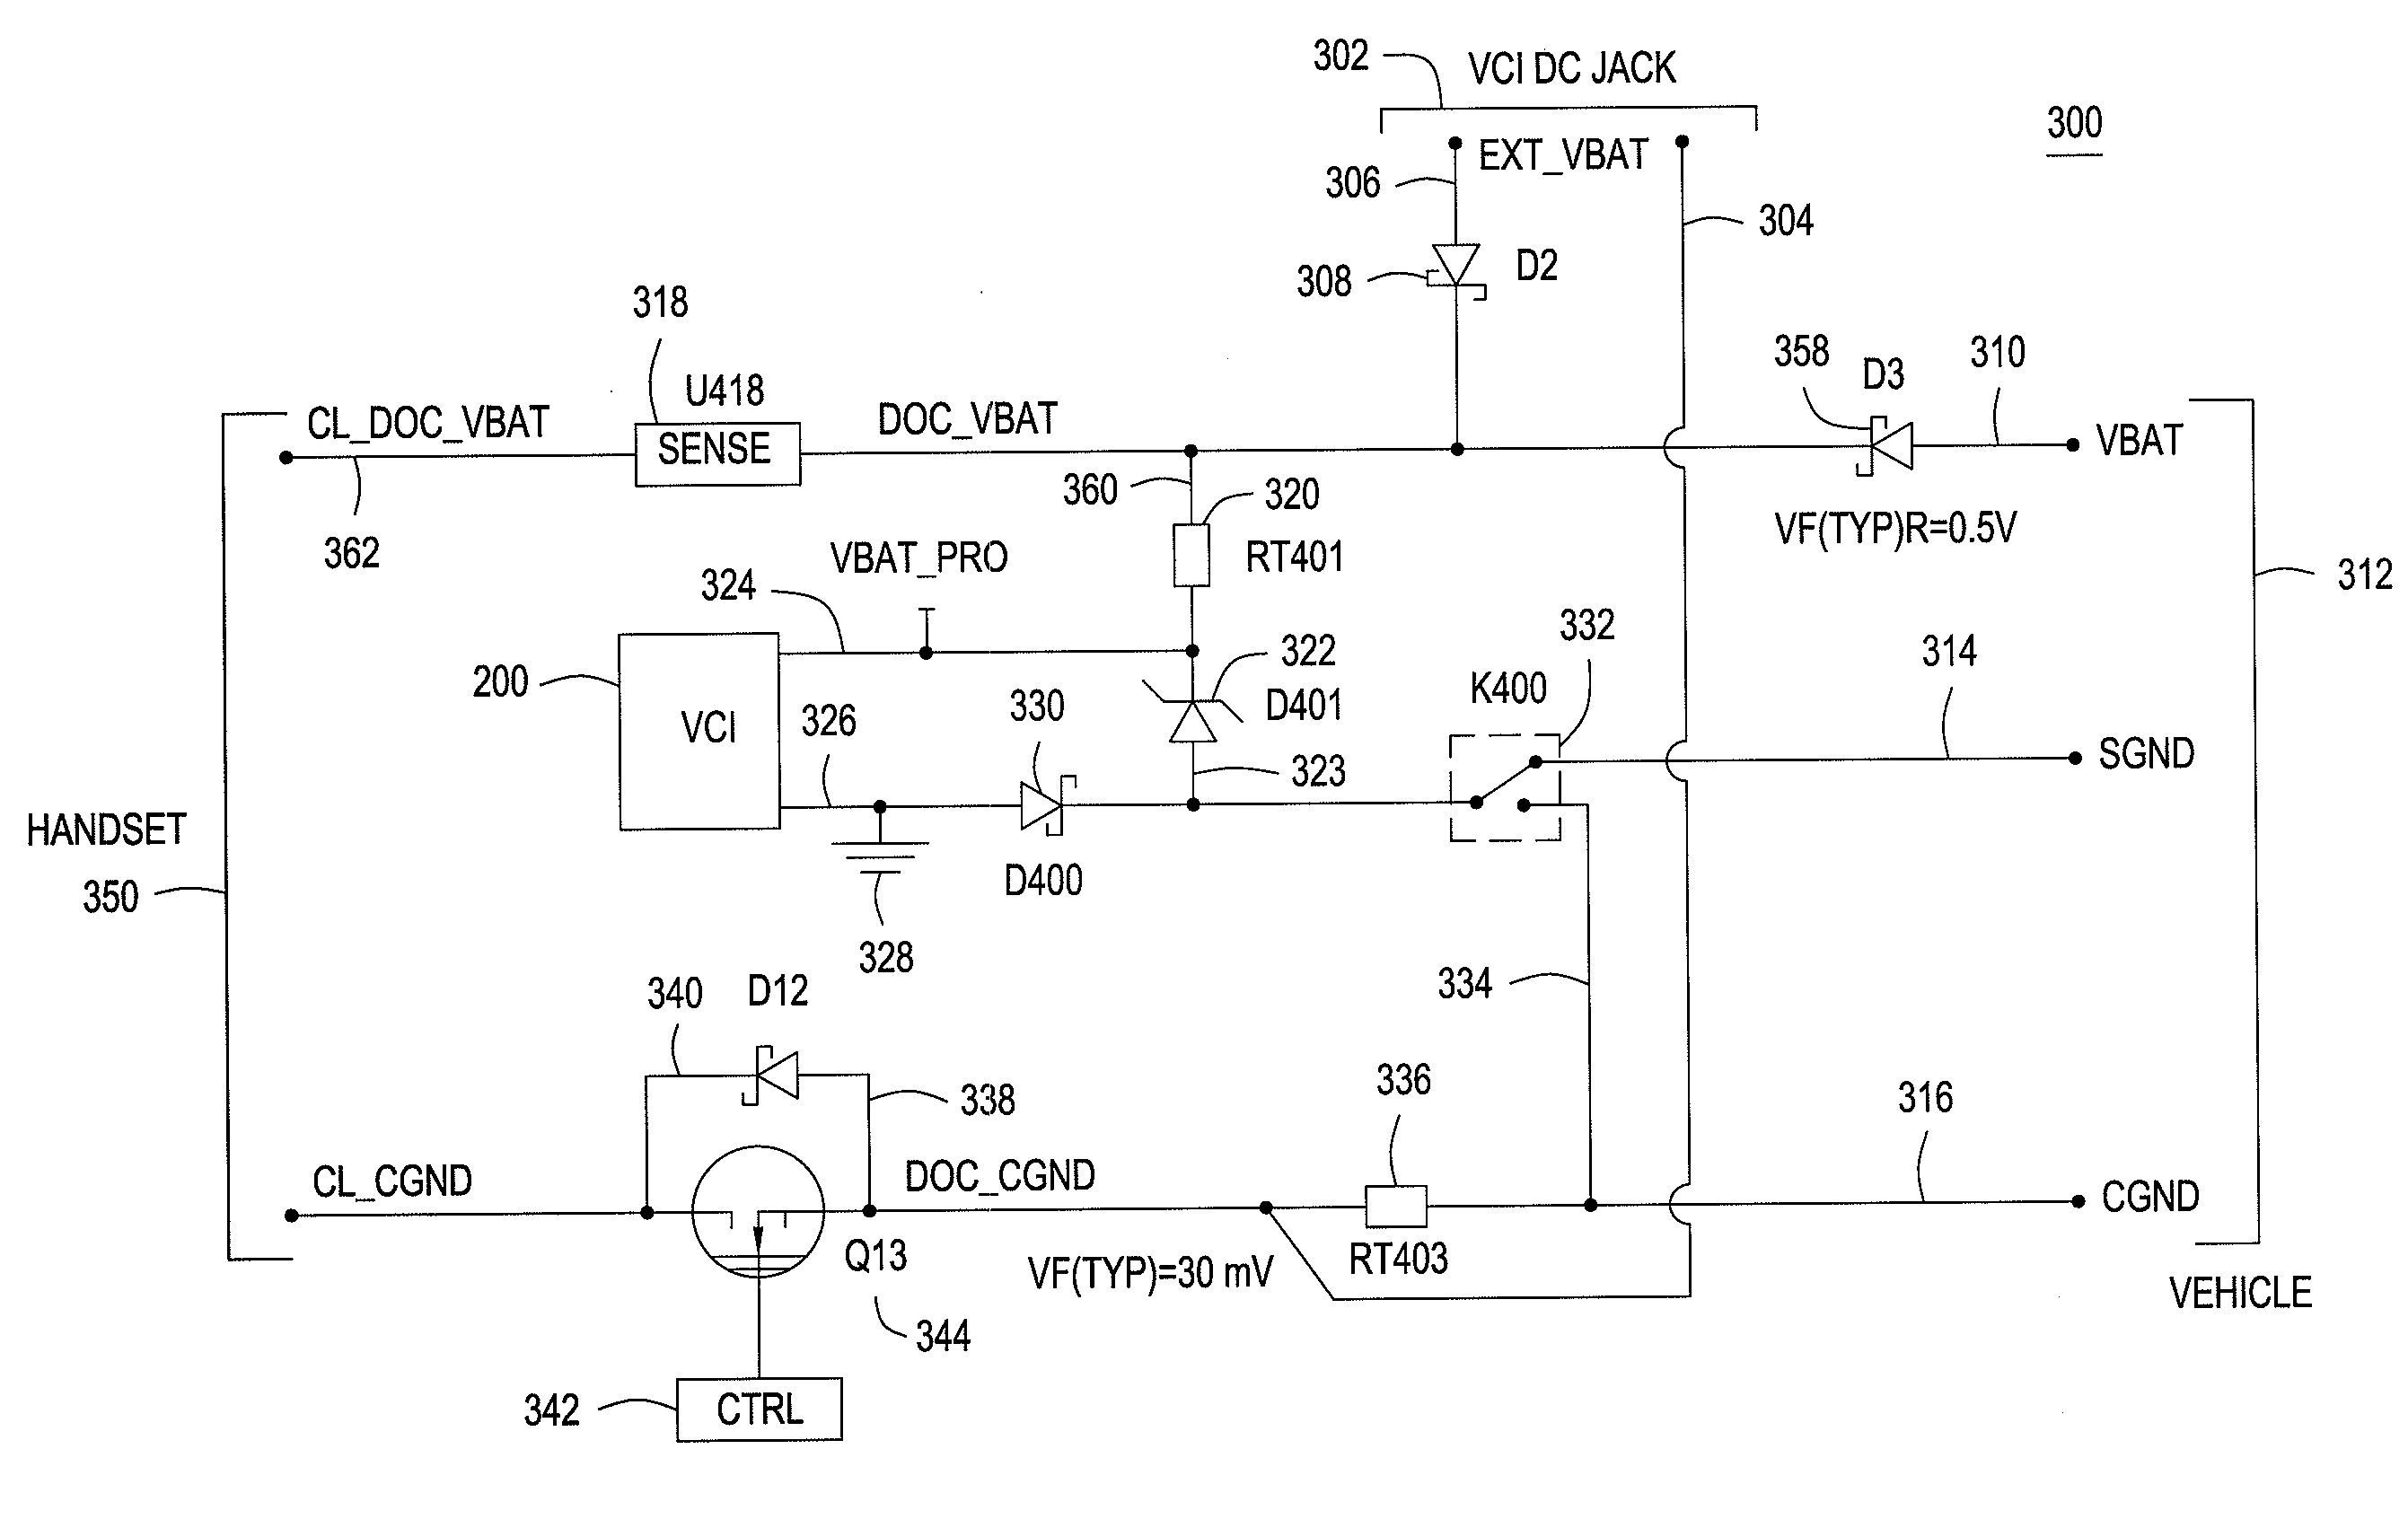 Power Balancing for Vehicle Diagnostic Tools